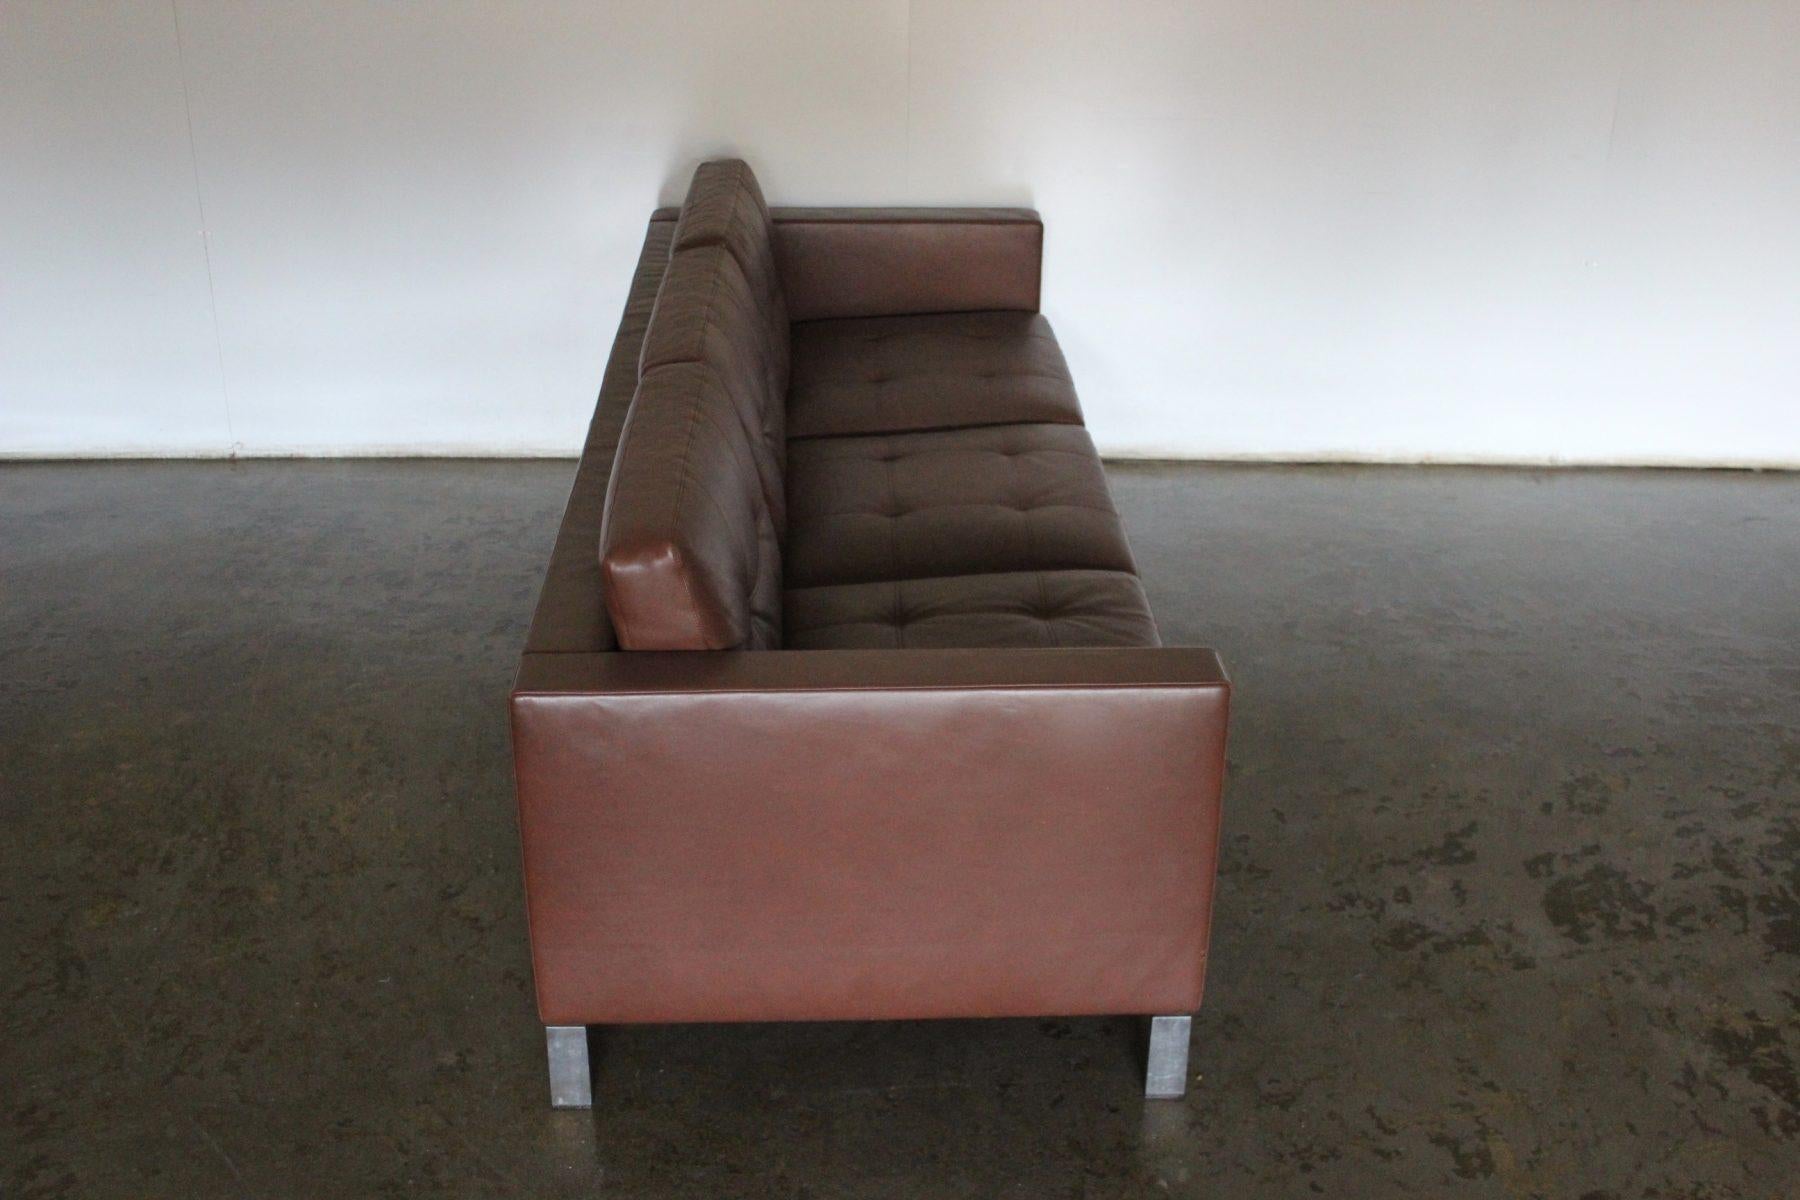 Walter Knoll “Foster 502.30” 3-Seat Sofa – In Dark Brown Leather In Good Condition For Sale In Barrowford, GB